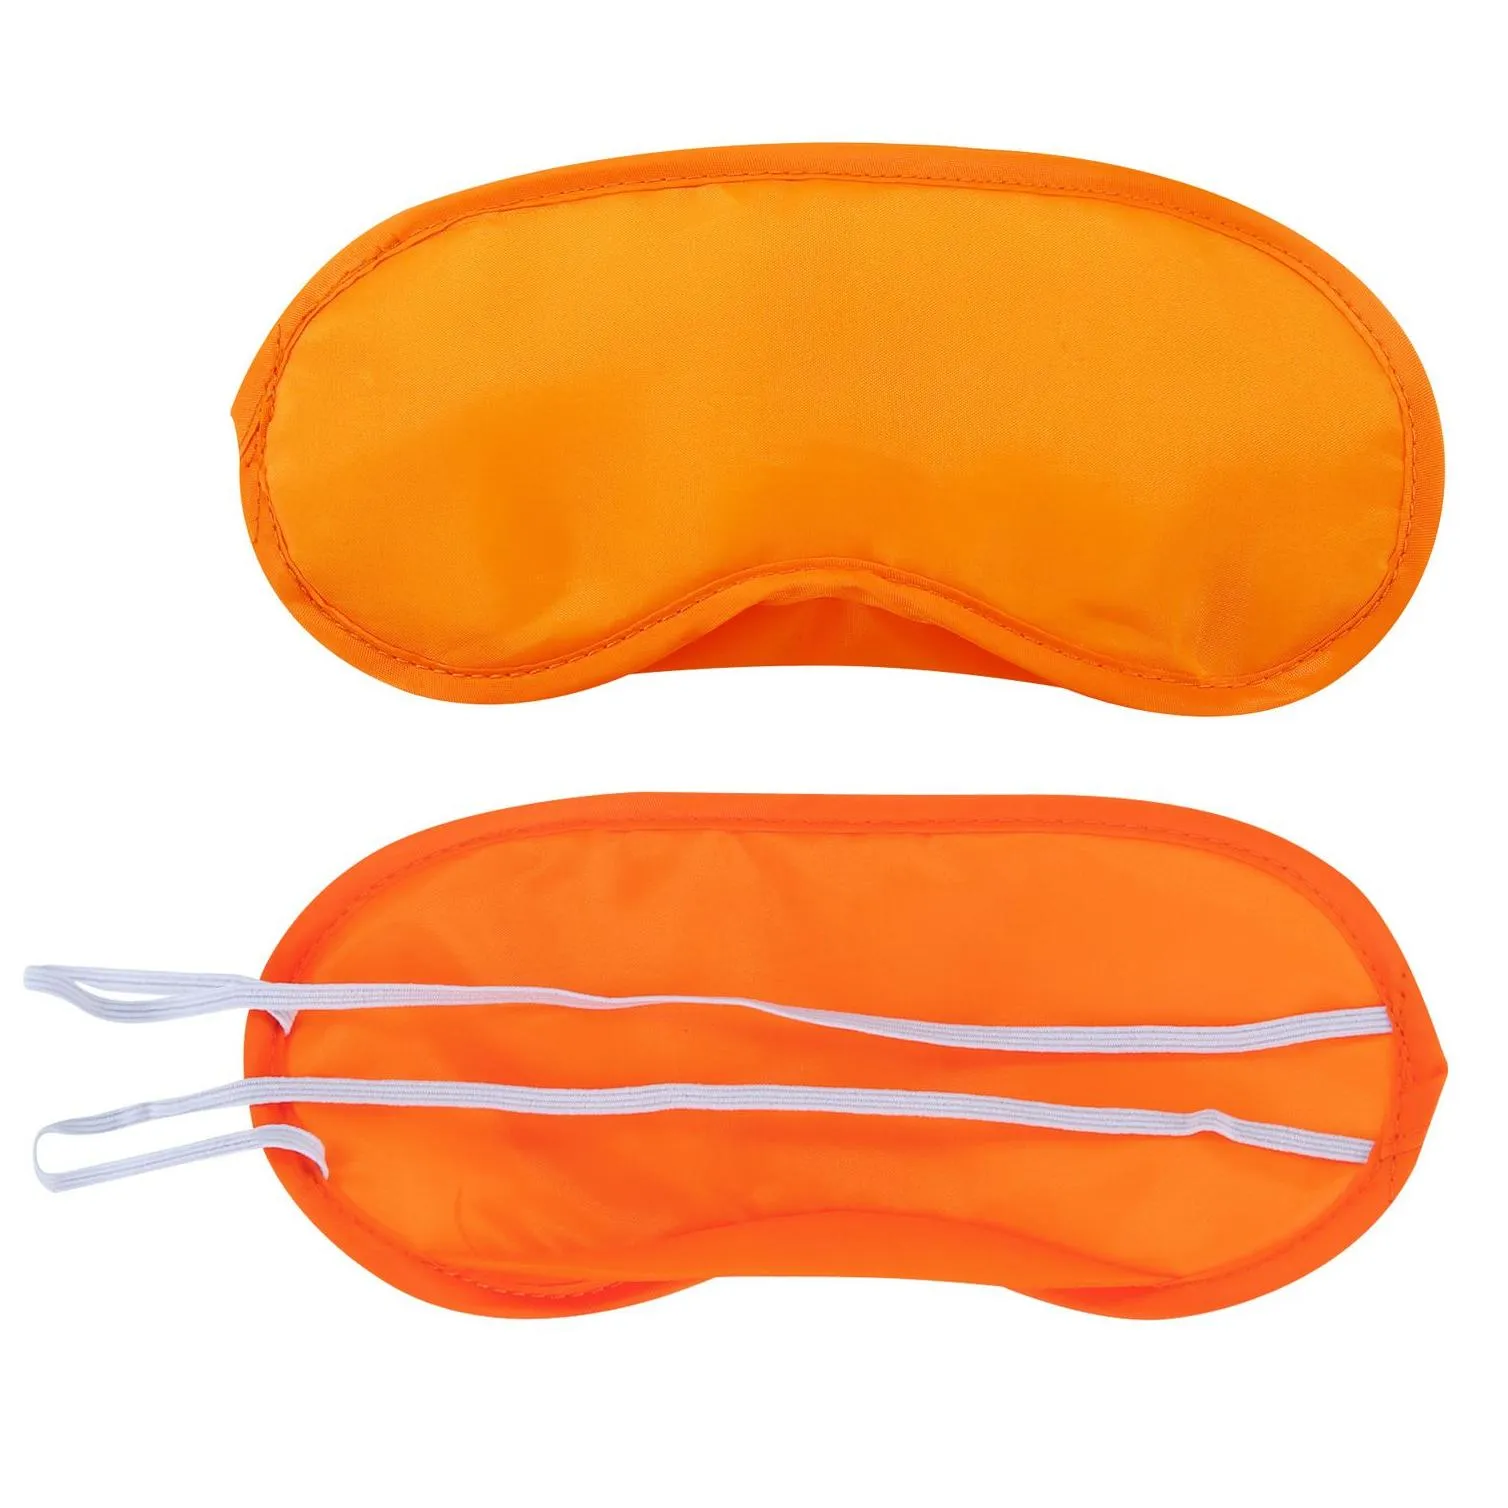 Sleep Masks 4 Layers Mask Polyester Sponge Shade Nap Er Blindfold For Slee Travel Soft 20 Colors Drop Delivery Health Beauty Vision C Dh3Fz